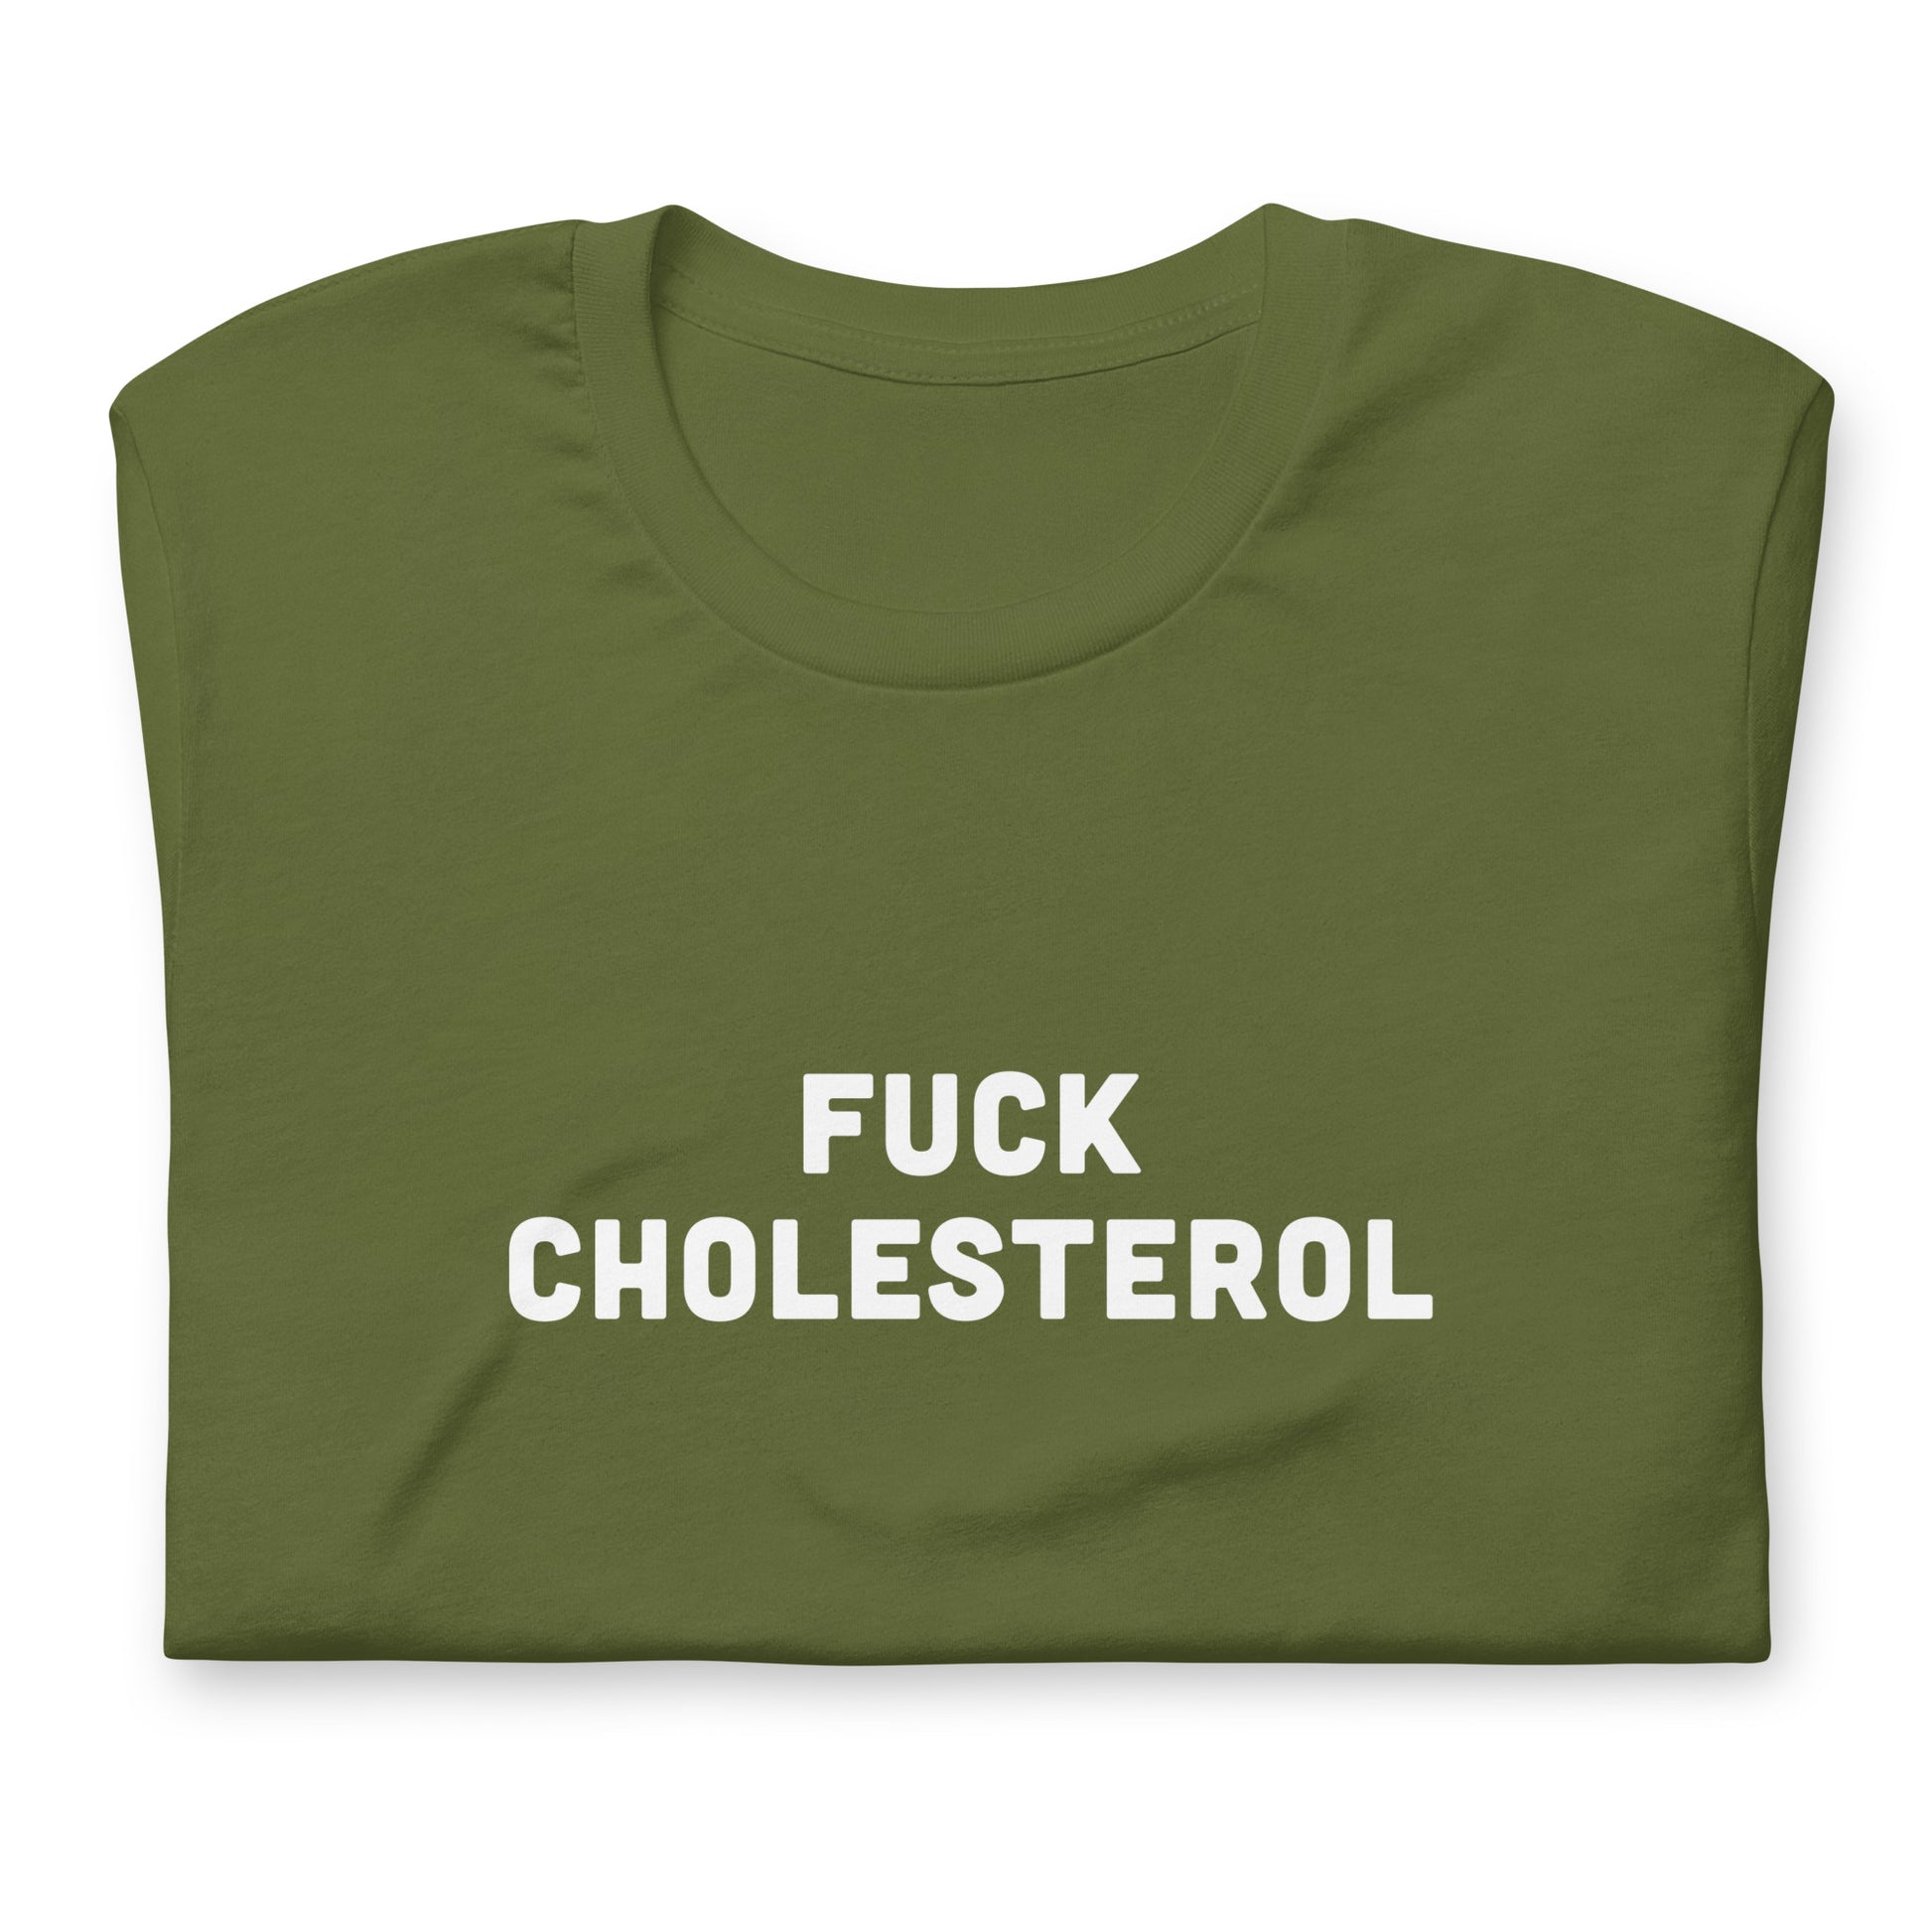 Fuck Cholesterol T-Shirt Size S Color Navy